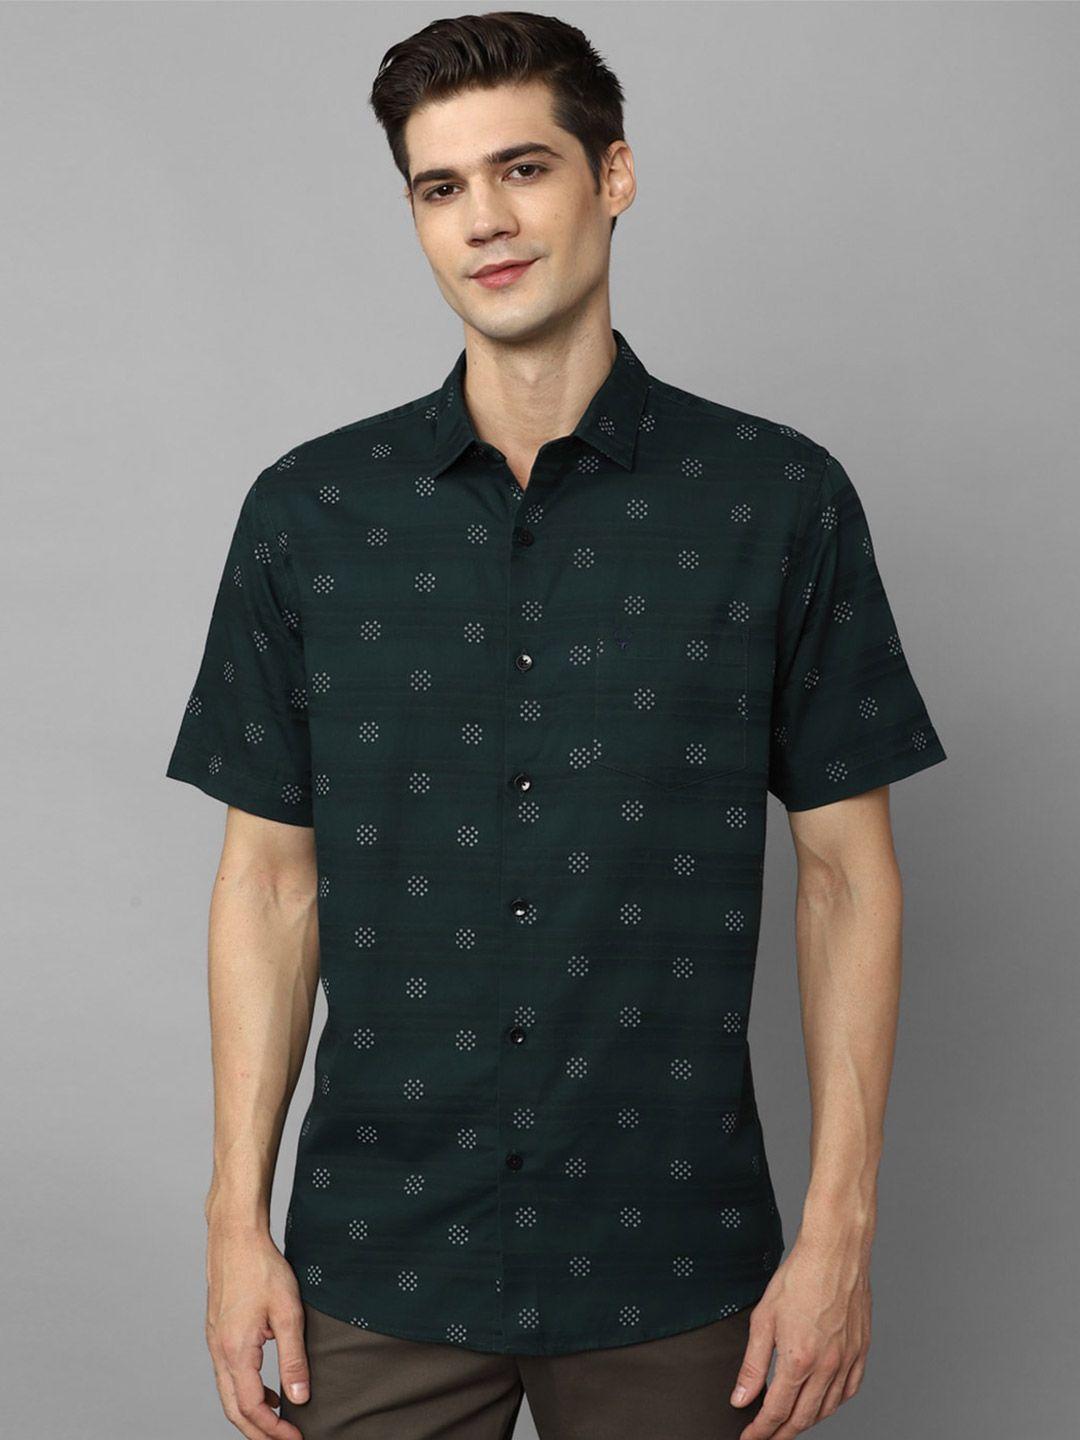 allen solly micro ditsy printed slim fit pure cotton casual shirt